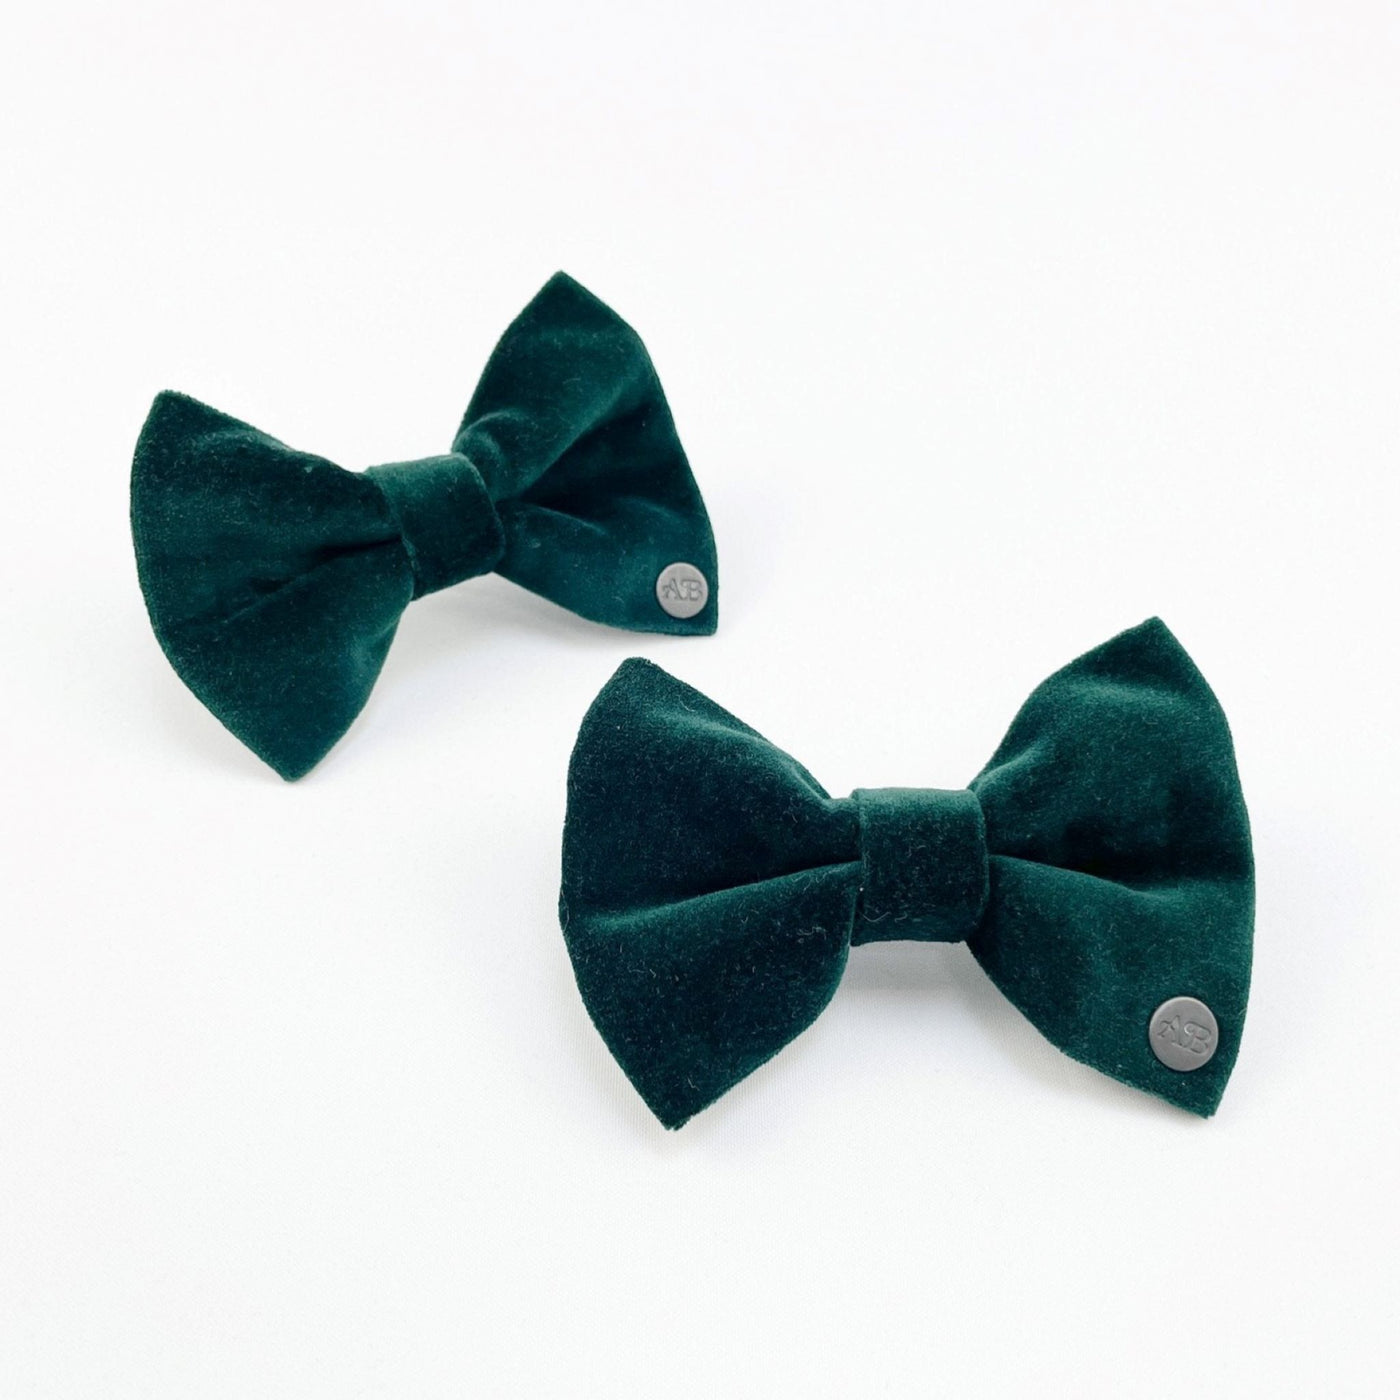 Luxury Emerald Green Velvet Dog Bow Tie available in three sizes -small, medium, large